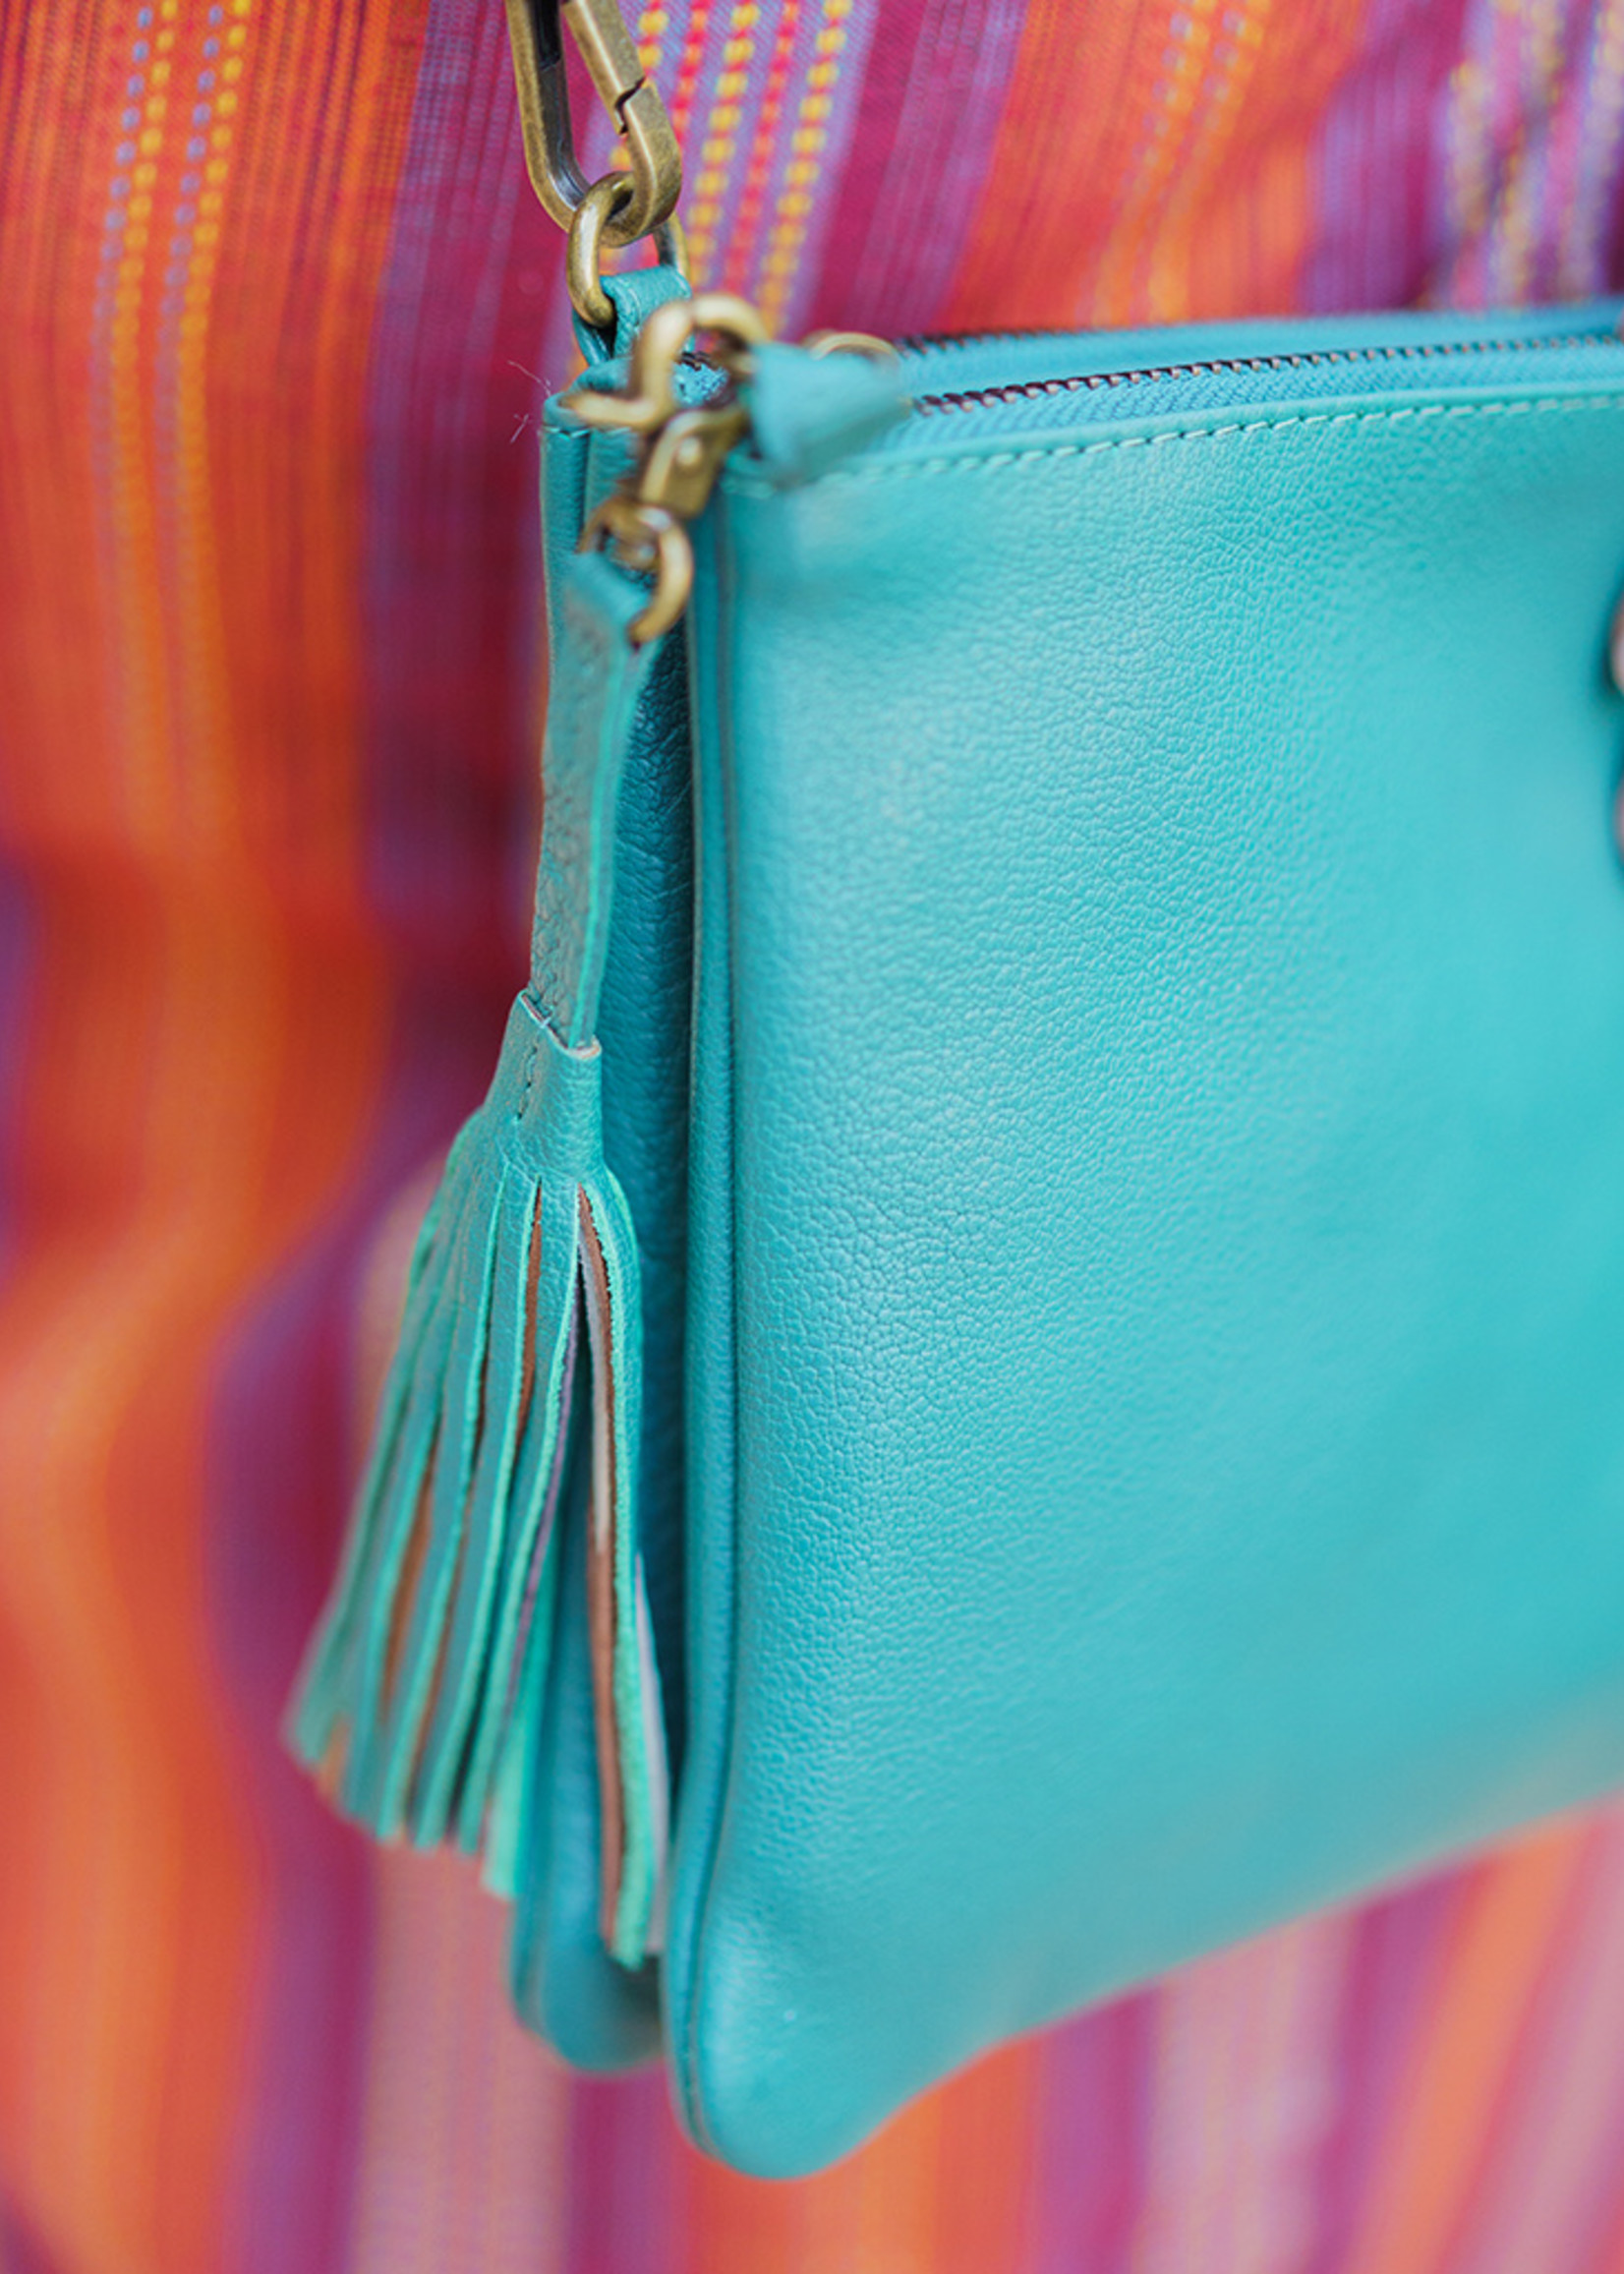 Leather Crossbody Purse in Teal from HumanKind Fair Trade - HumanKind Fair  Trade